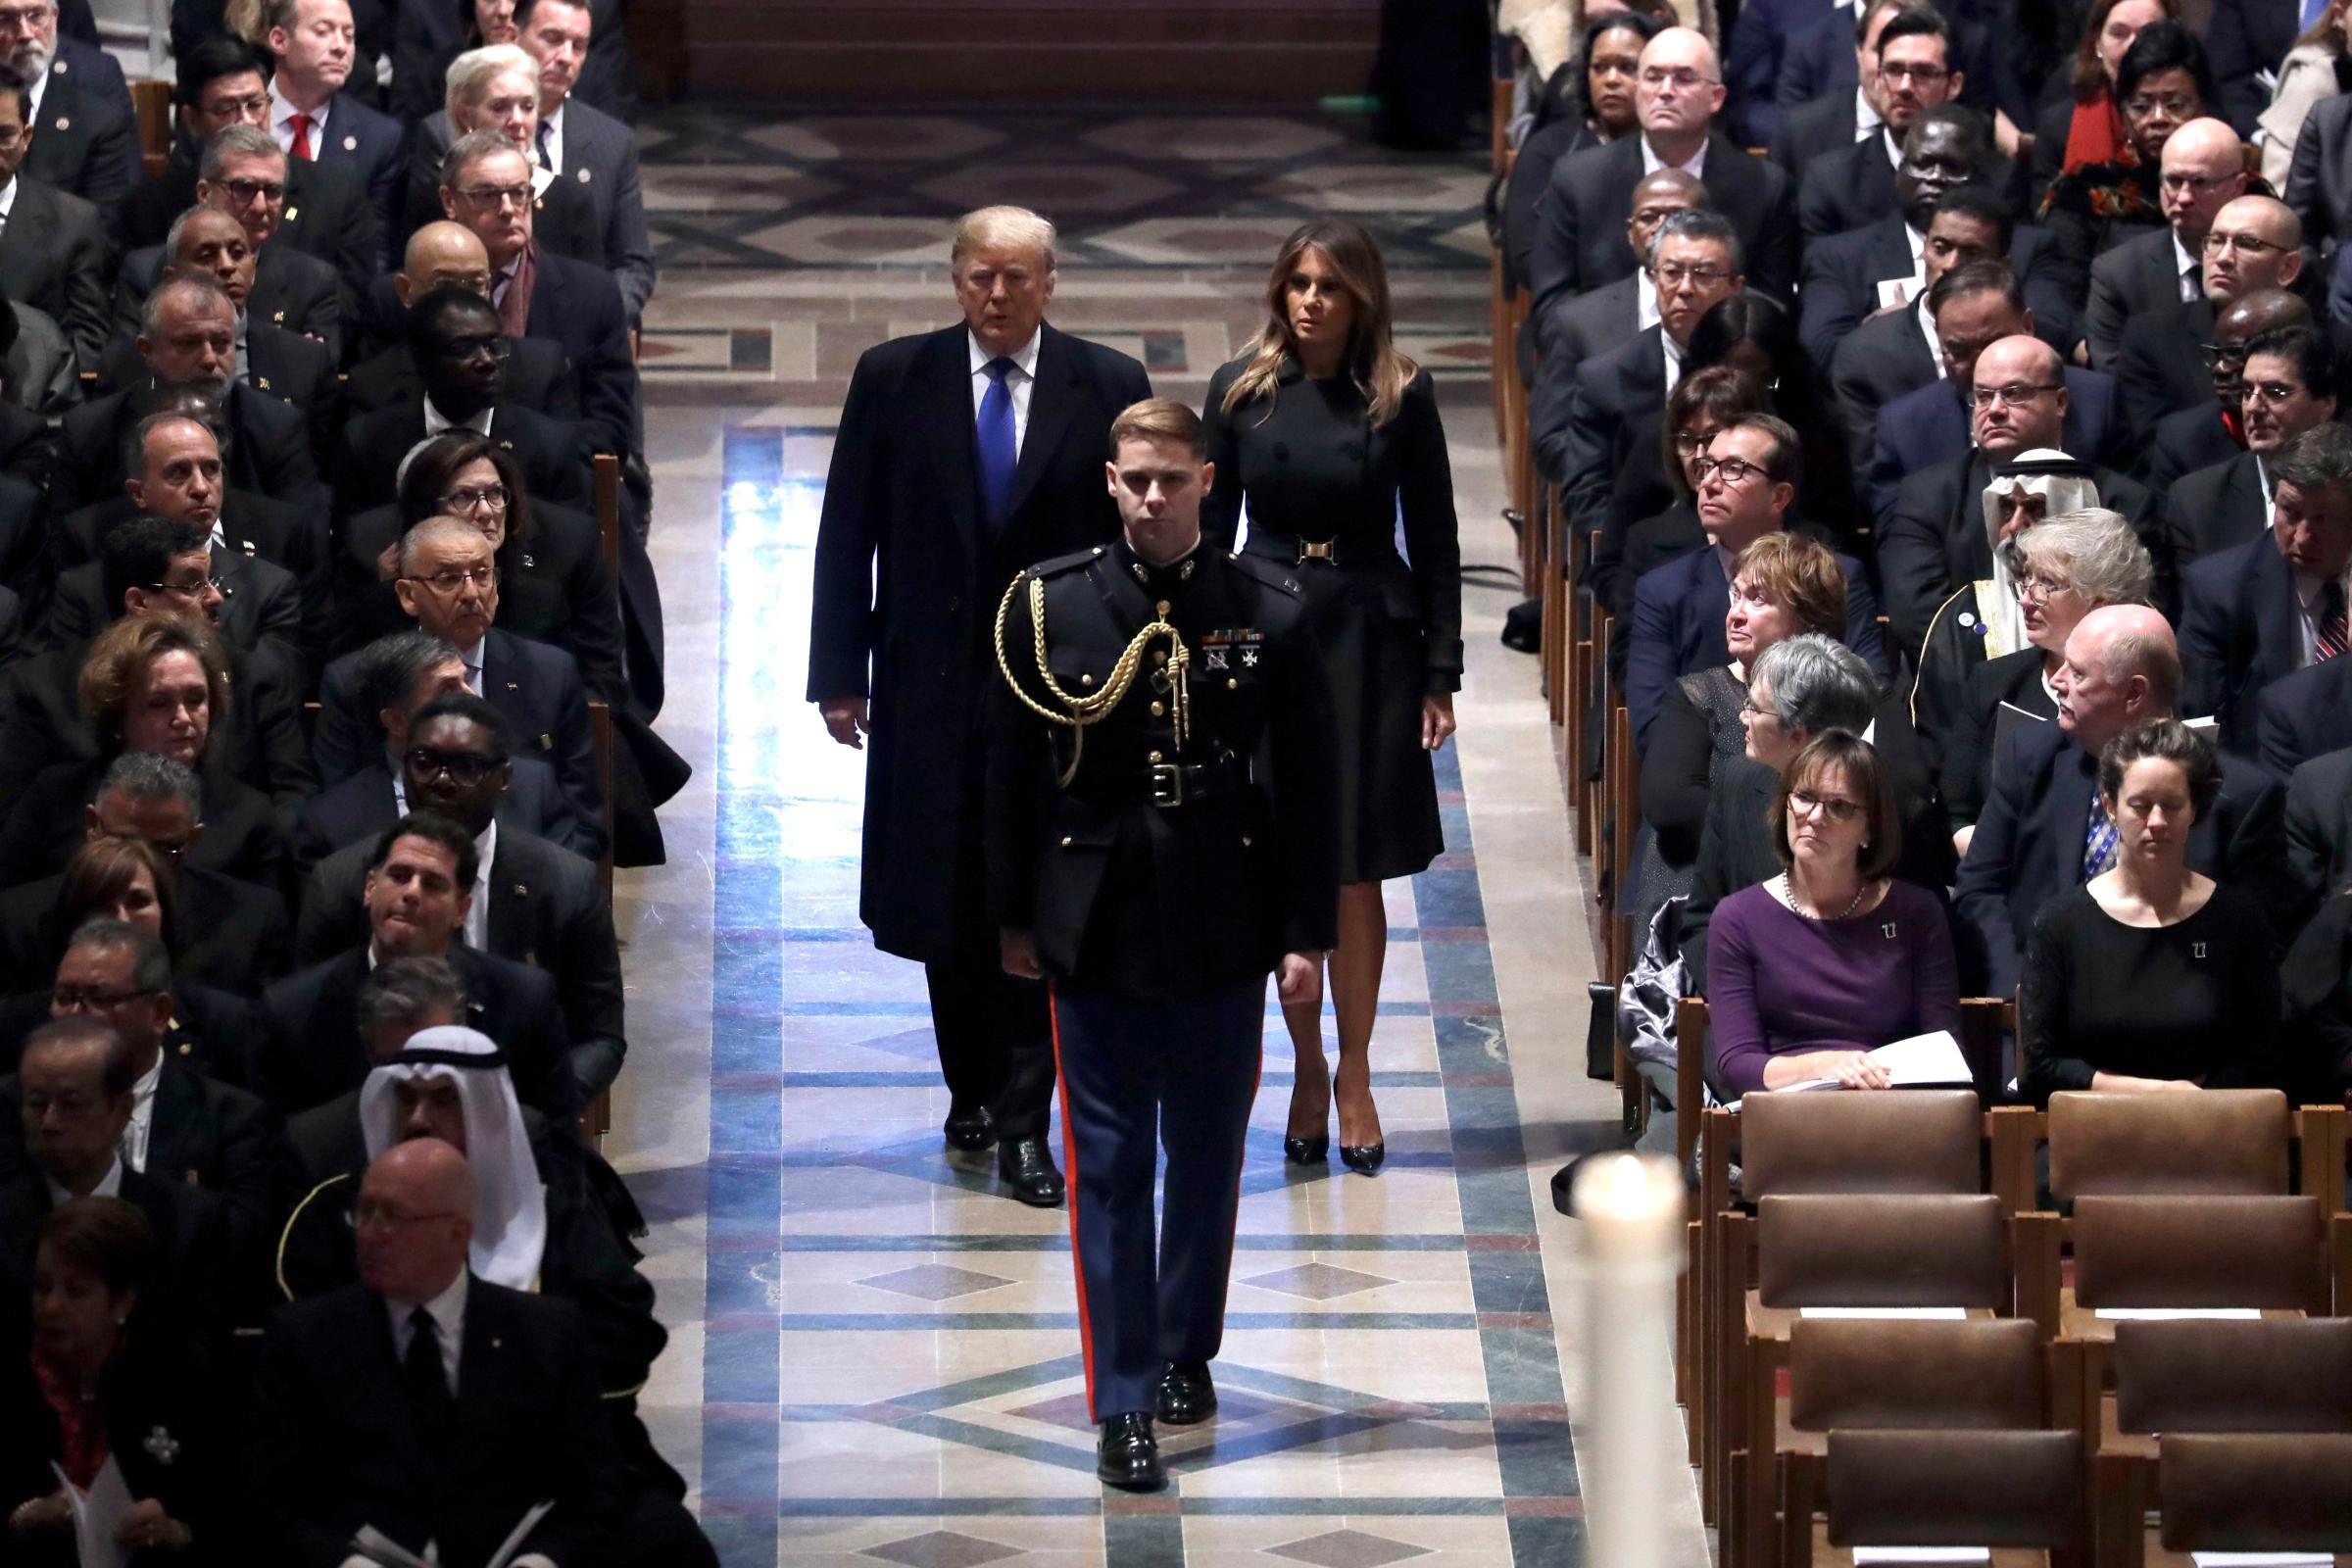 President Donald Trump and first lady Melania Trump arrive at the funeral of ormer President George H.W. Bush, at the National Cathedral